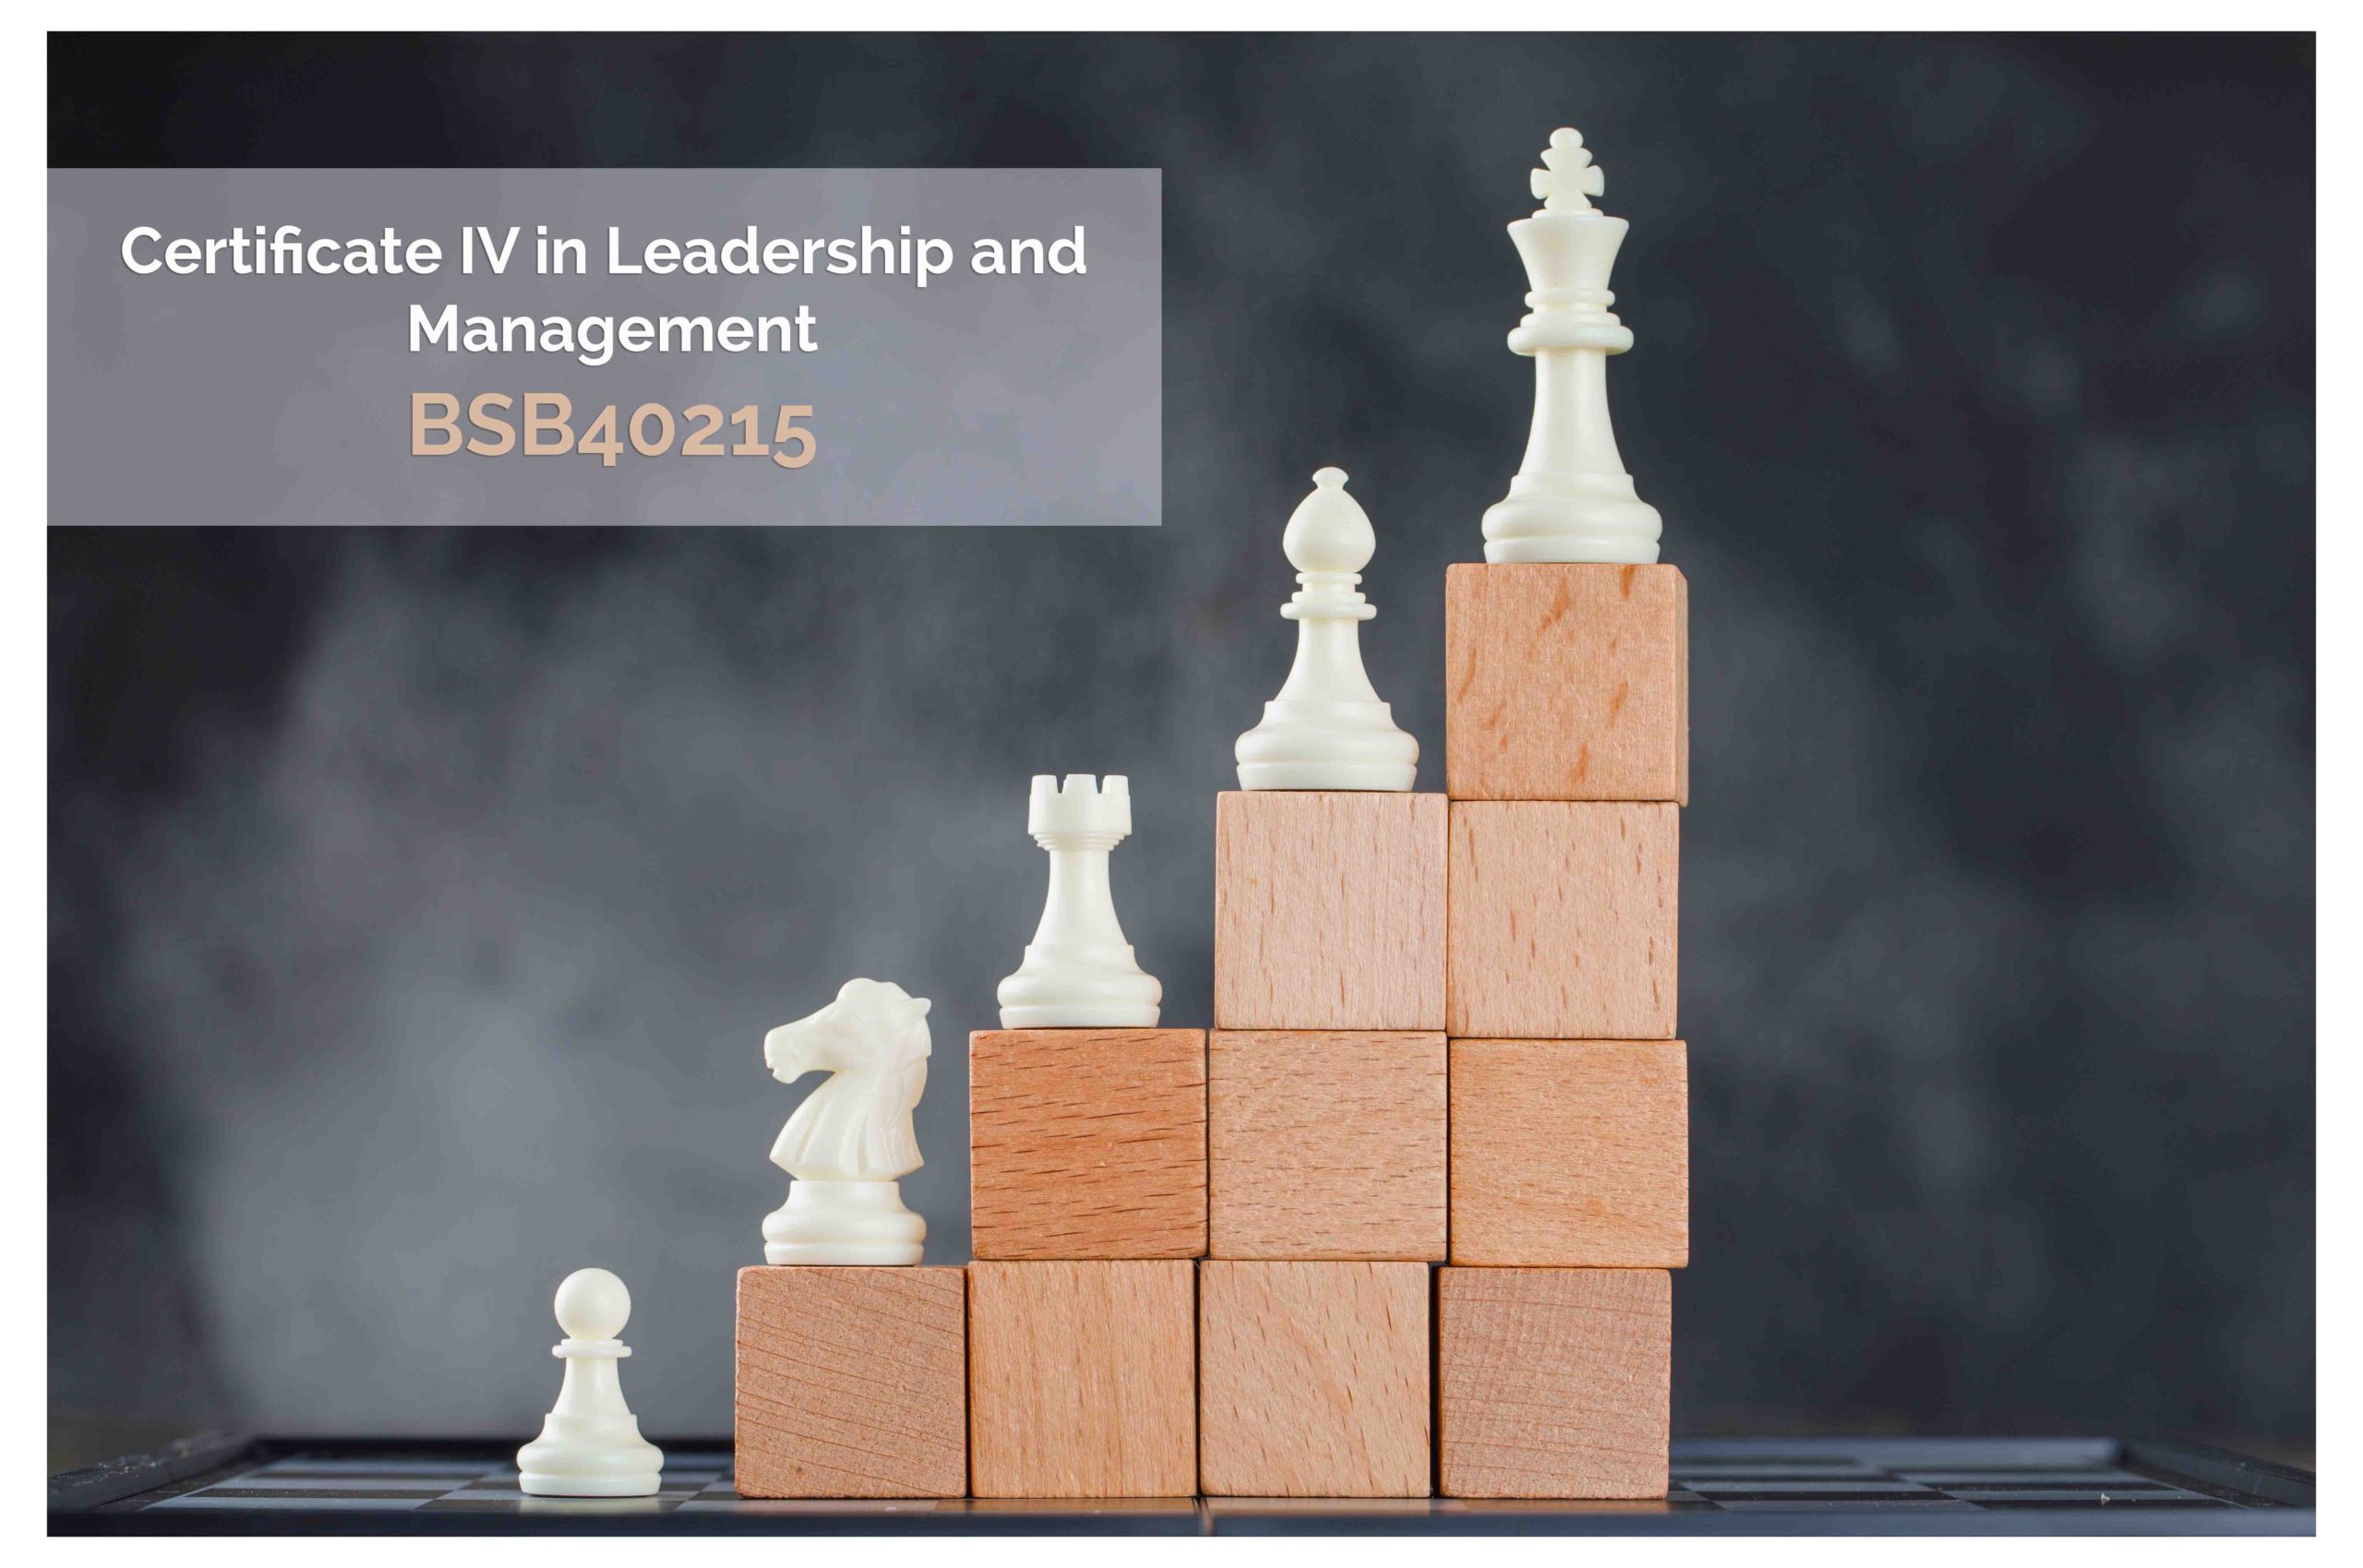 BSB42015 – Certificate IV in Leadership and Management